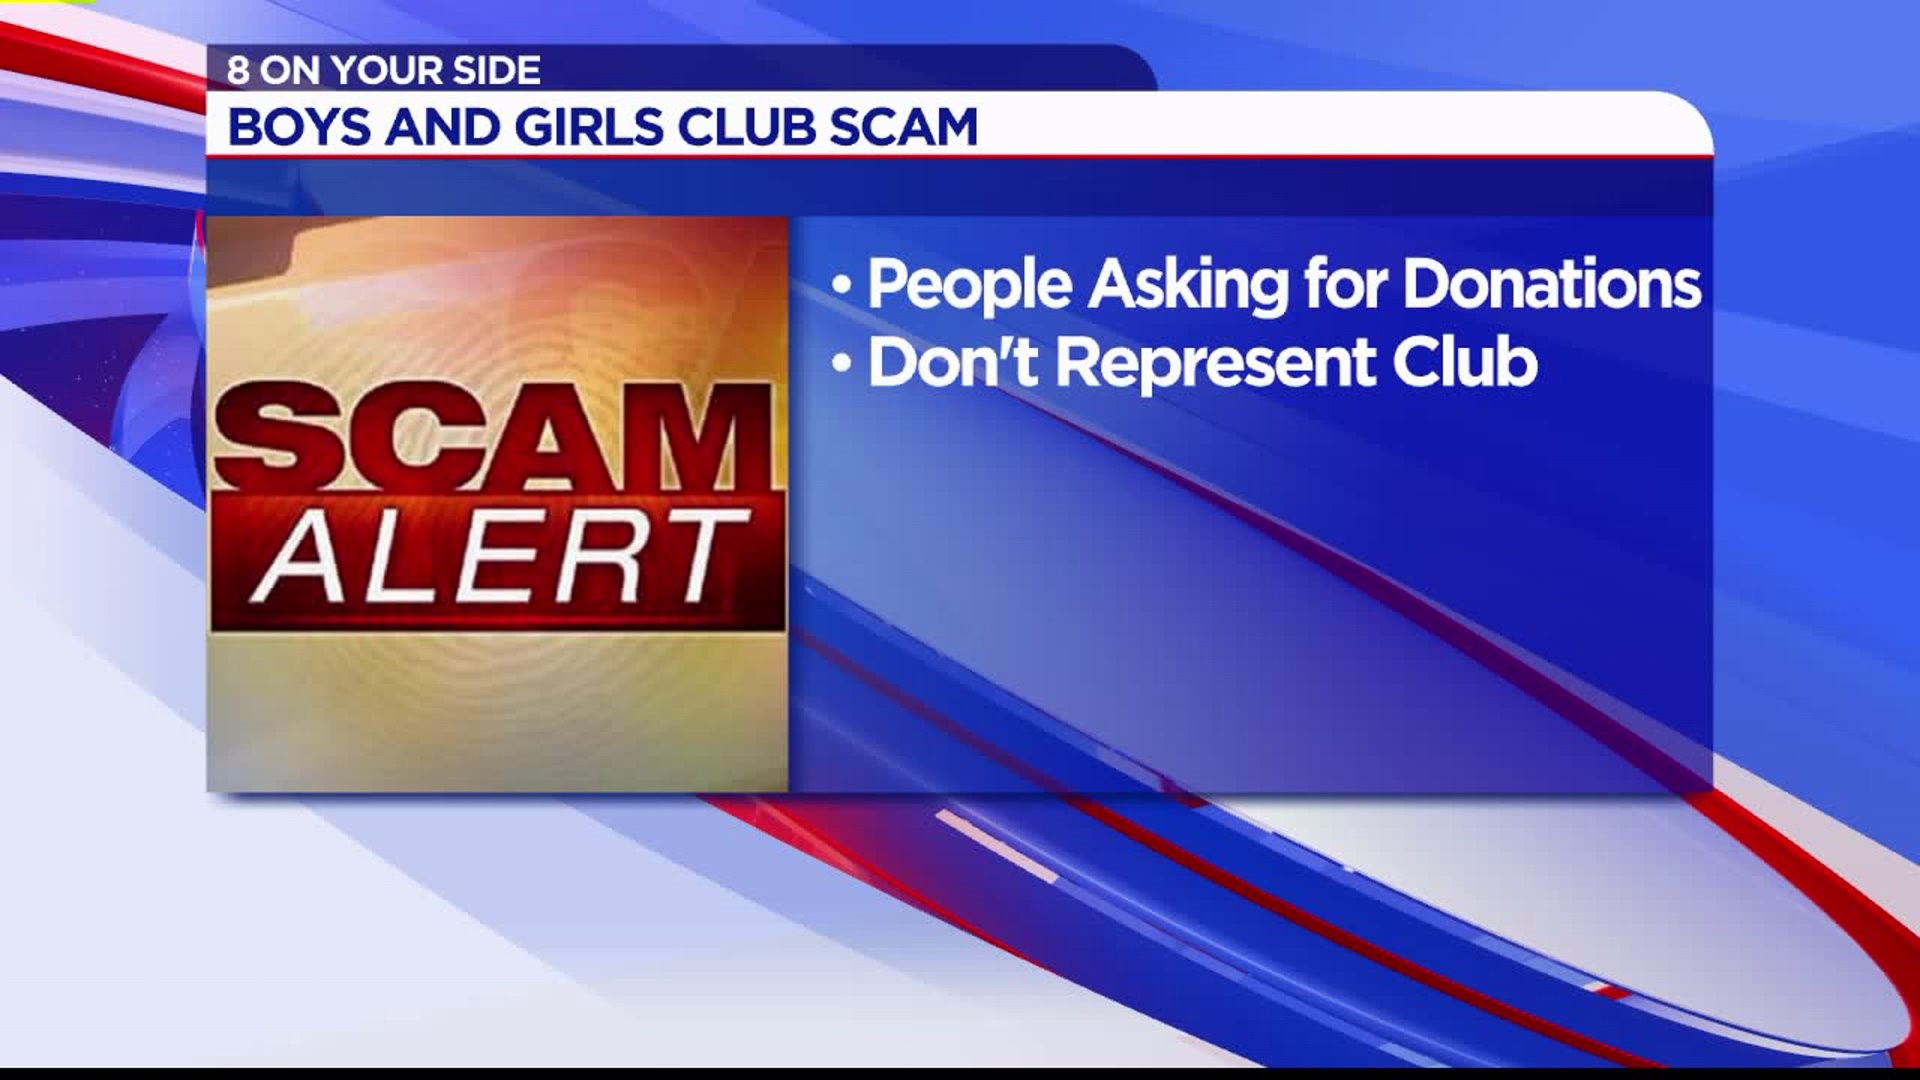 Boys and Girls Club warns of a scam